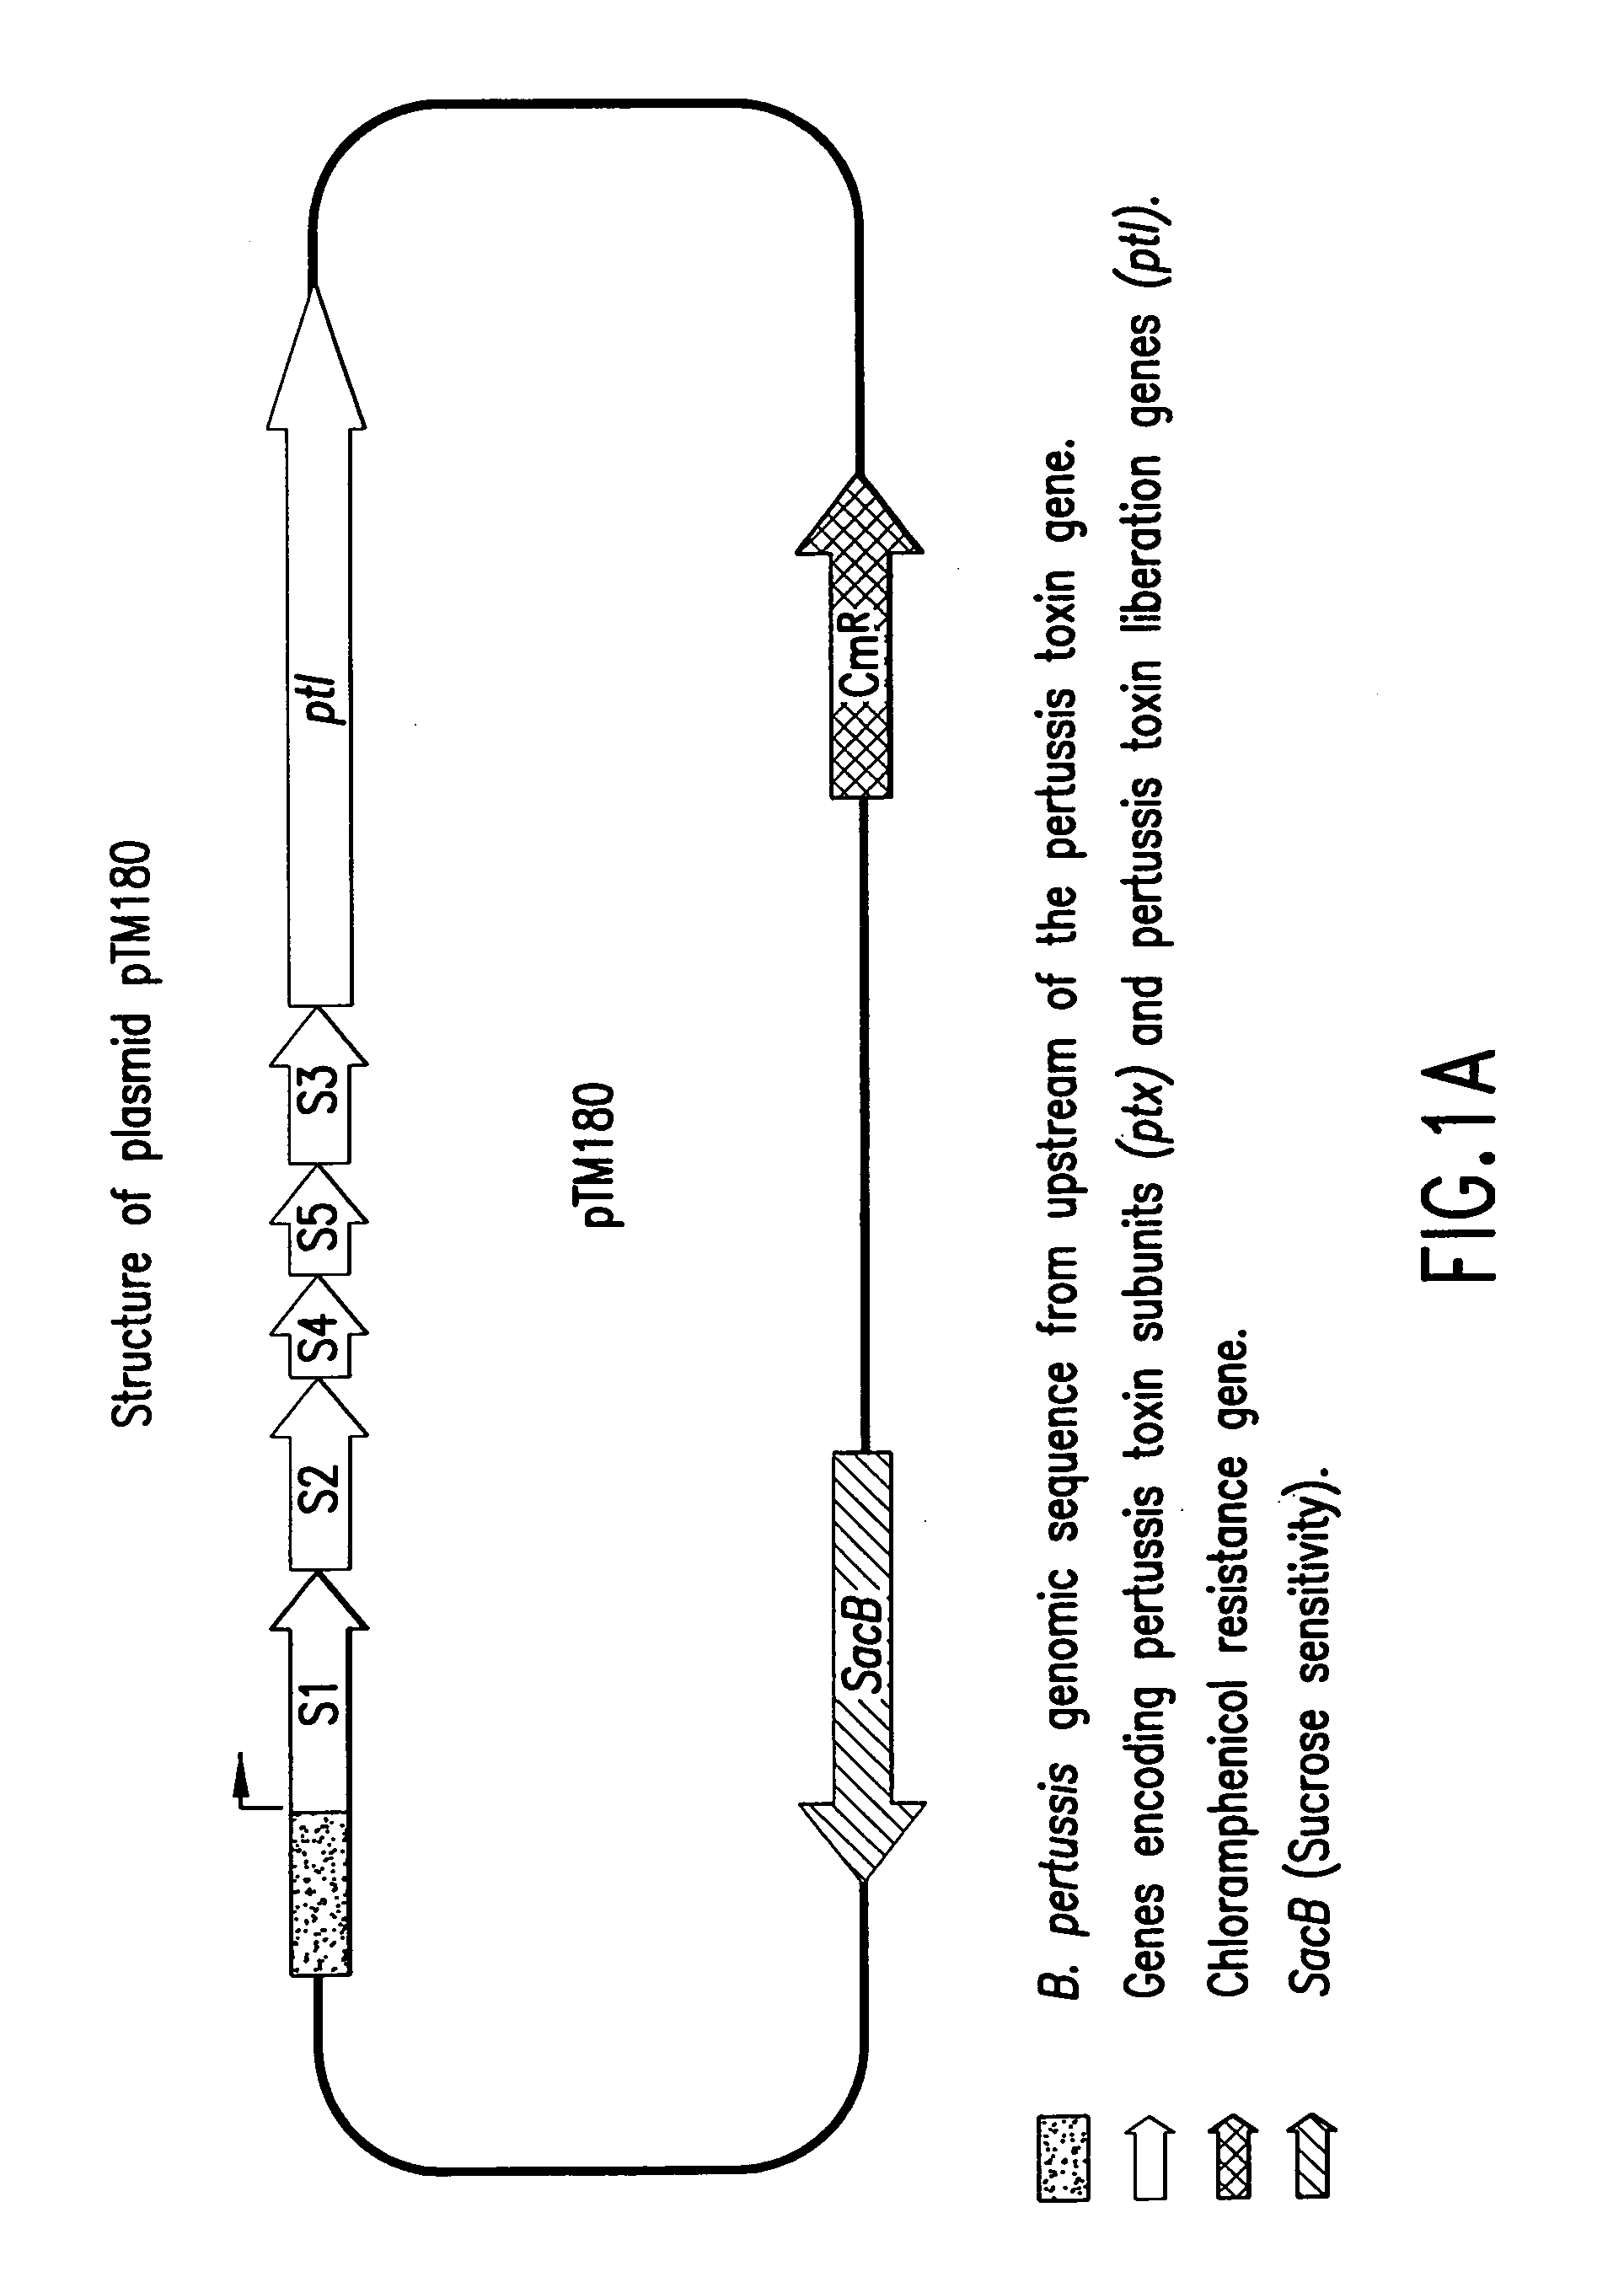 High yield pertussis vaccine production strain and method for making same